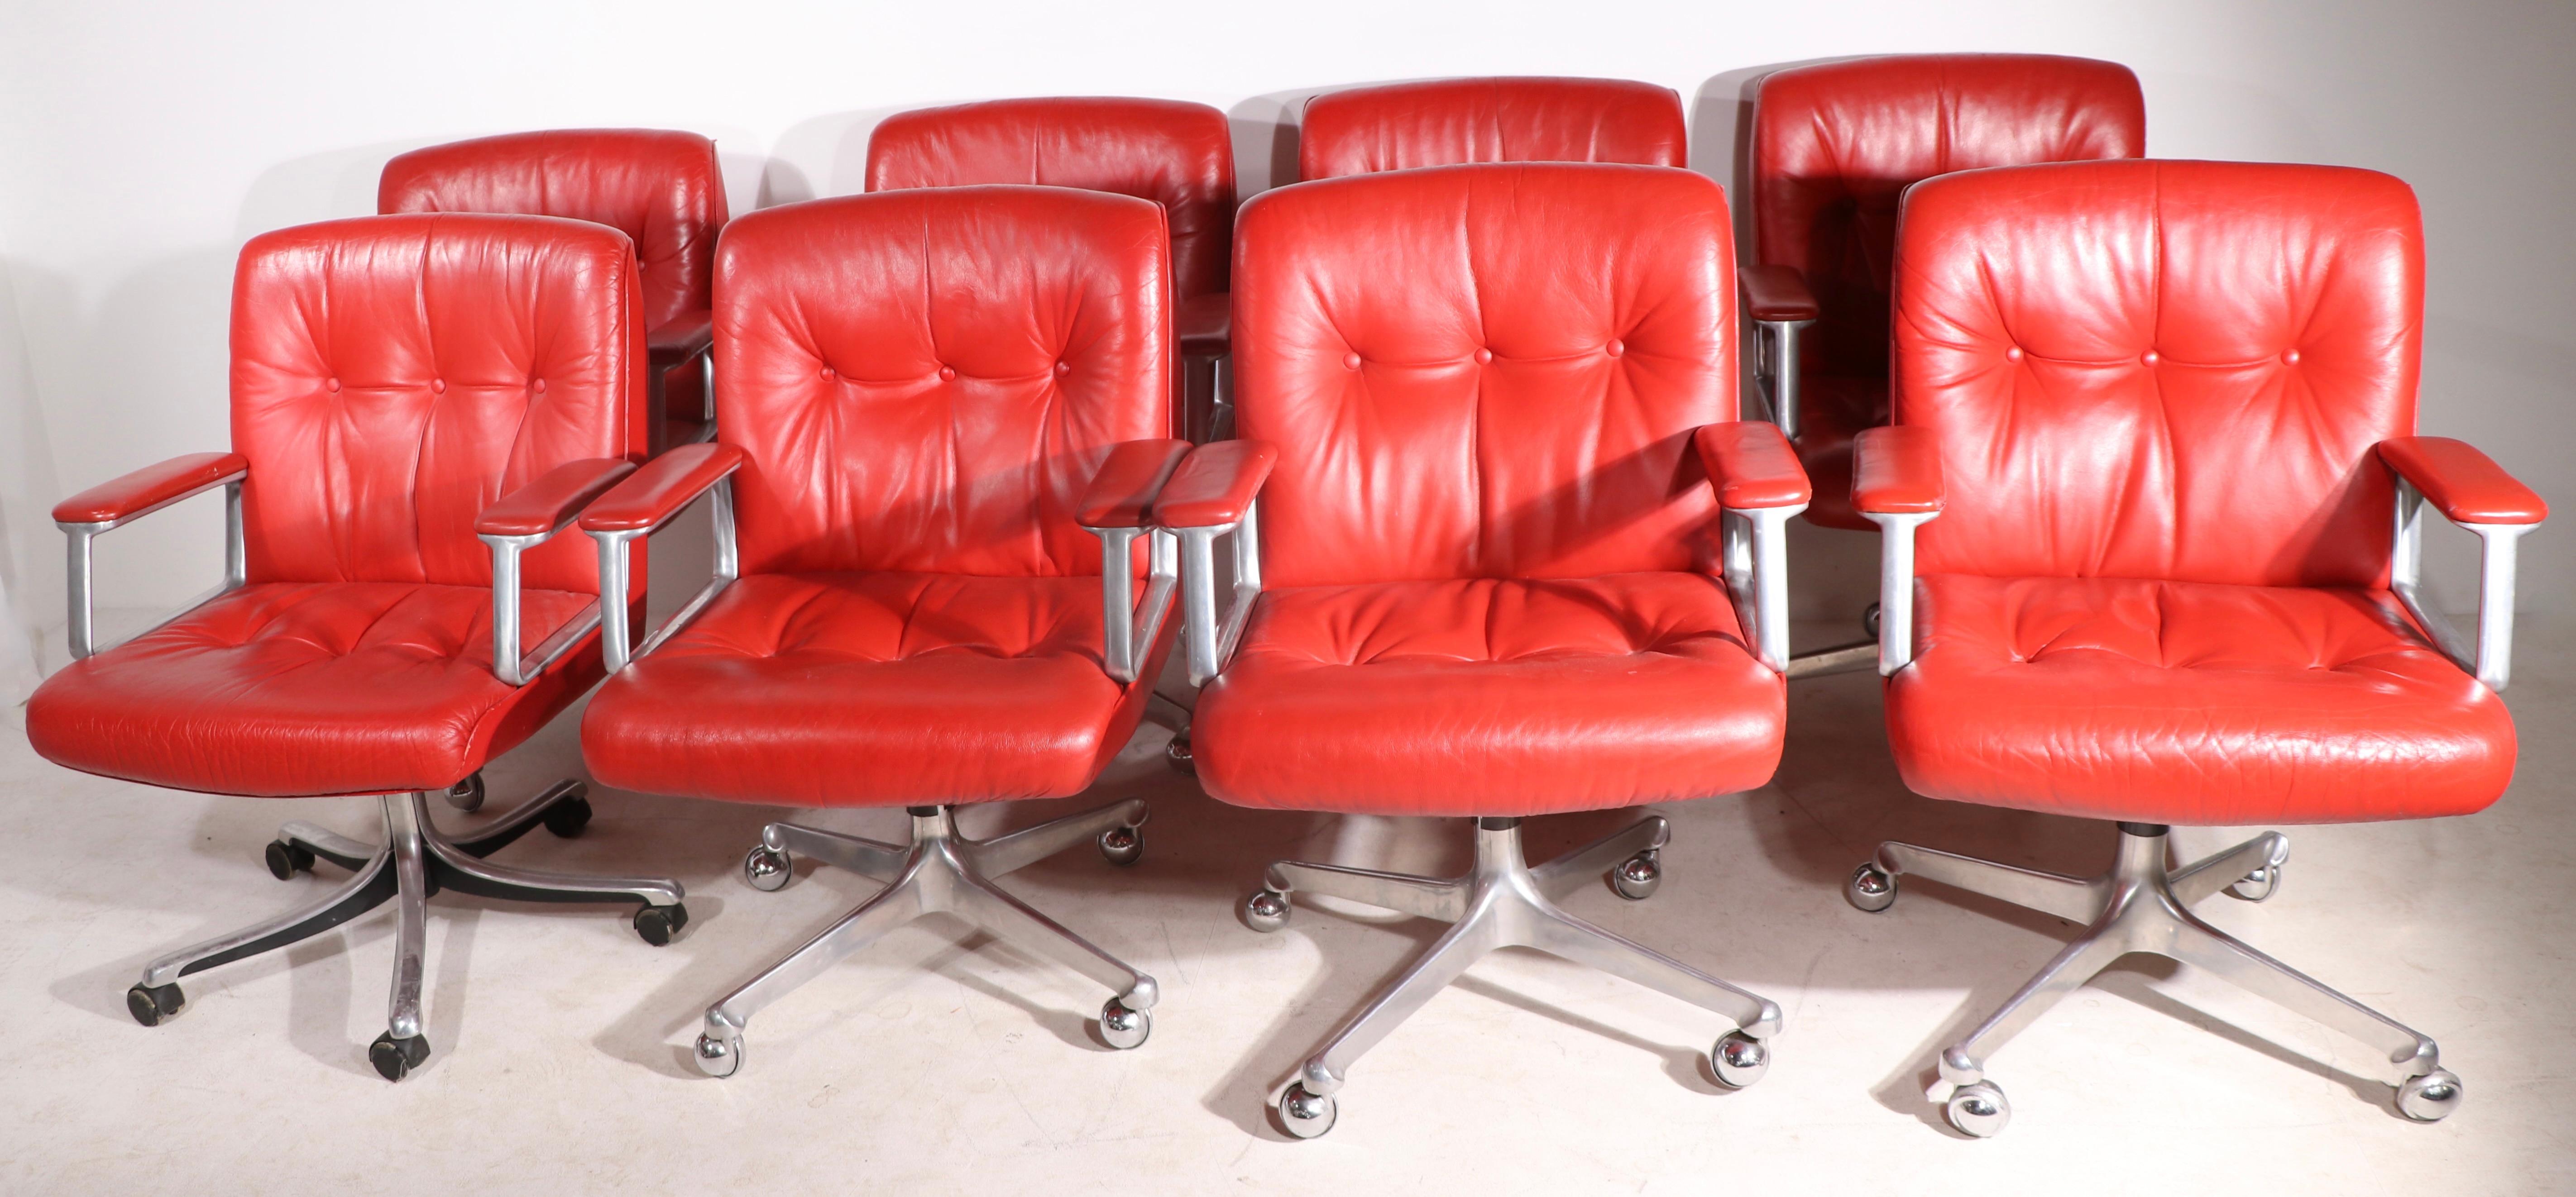 8 P128 Borsani Swivel Desk Chairs in Lipstick Red Leather Upholstery  11